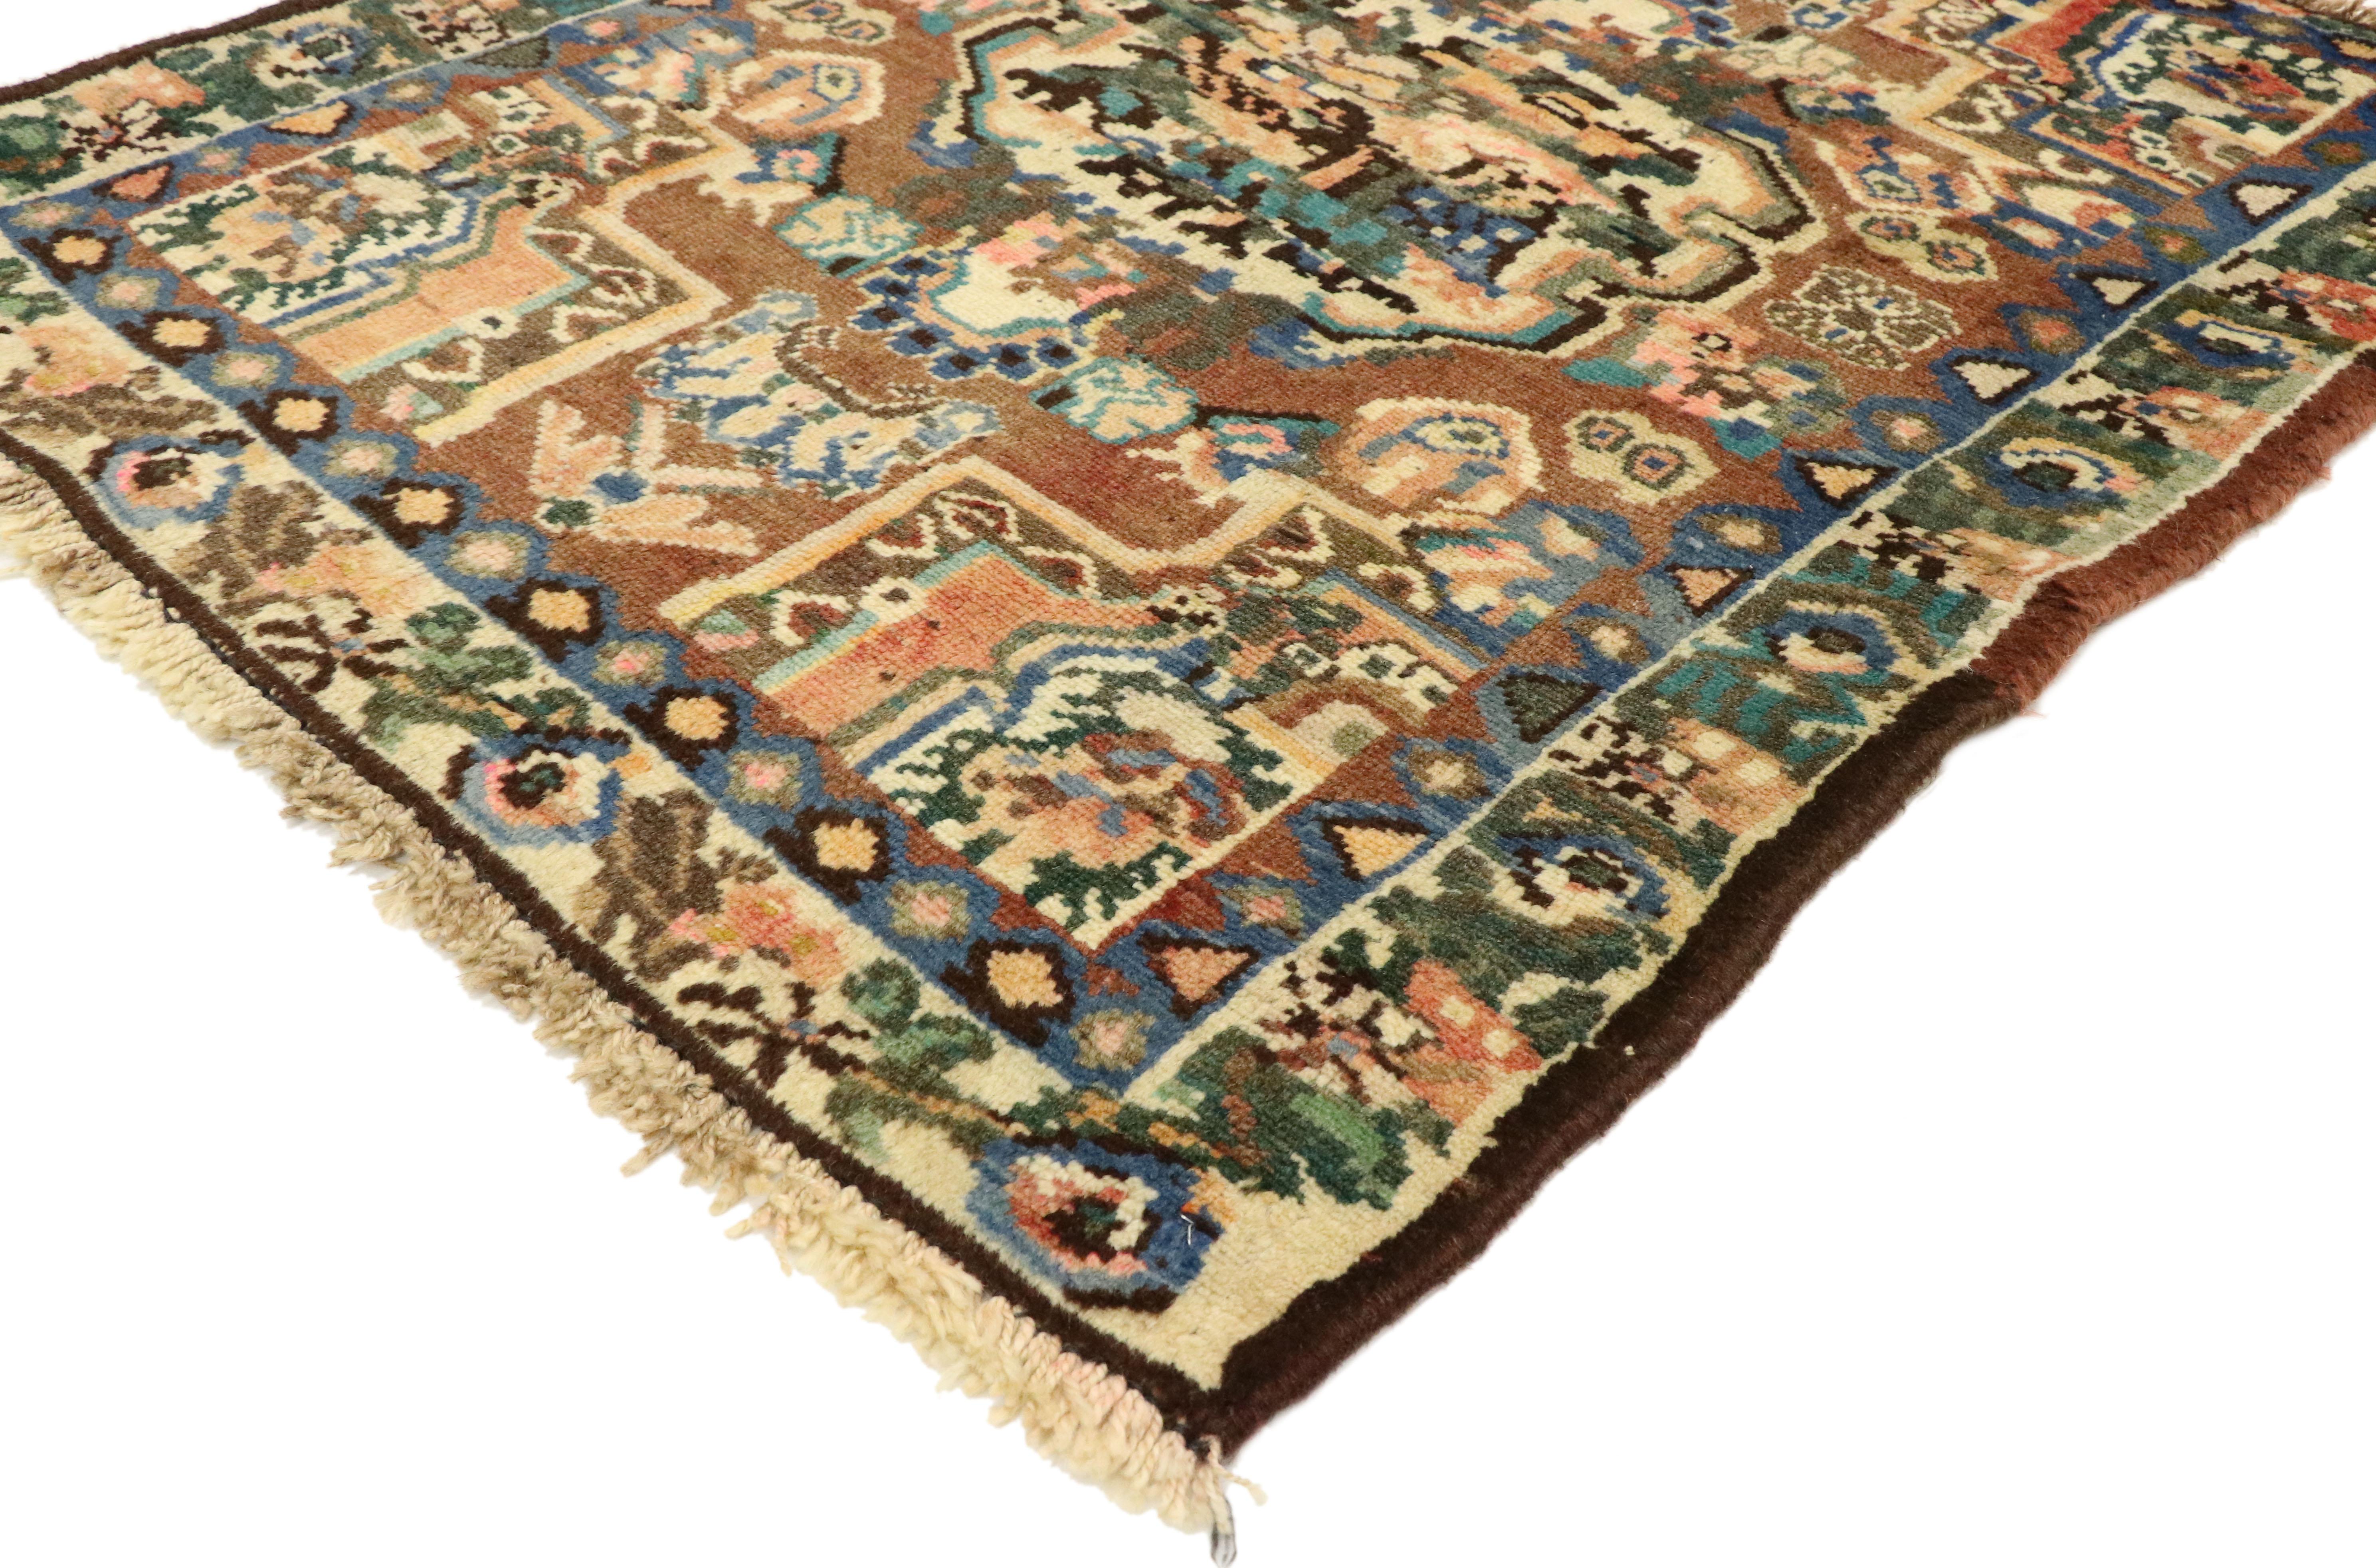 75762, vintage Persian Bakhtiari accent rug, kitchen, bath mat, foyer or entryway rug. This hand knotted wool vintage Persian Bakhtiari accent rug features a modern traditional style. Immersed in Persian history and timeless style, this small